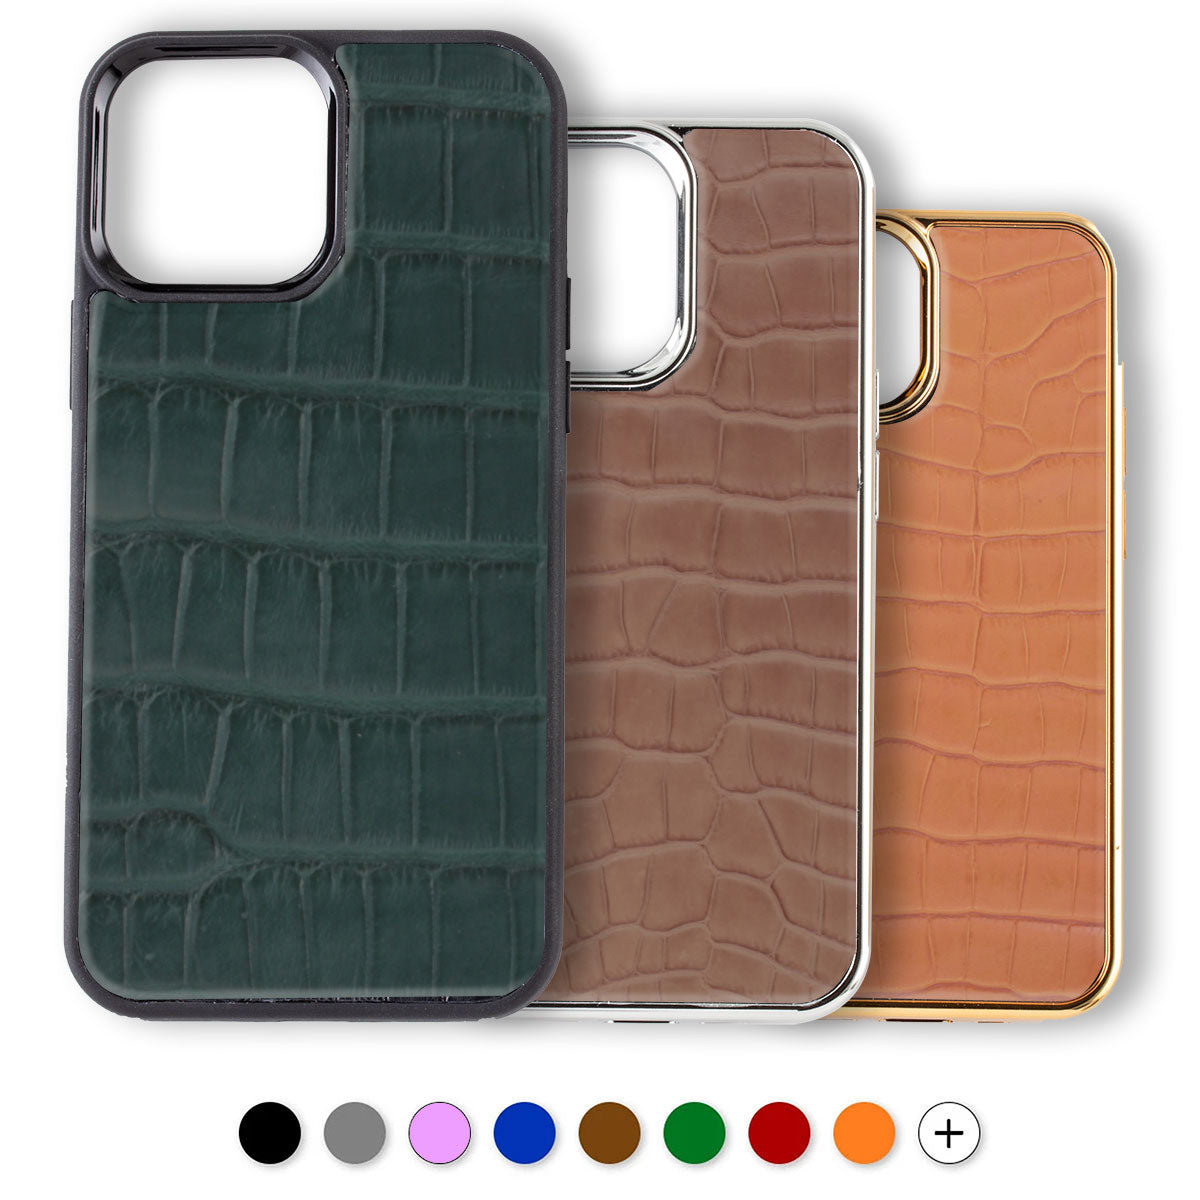  iPhone "Sport case" with leather cover - iPhone 13 ( Pro / Max / Mini ) - Genuine alligator